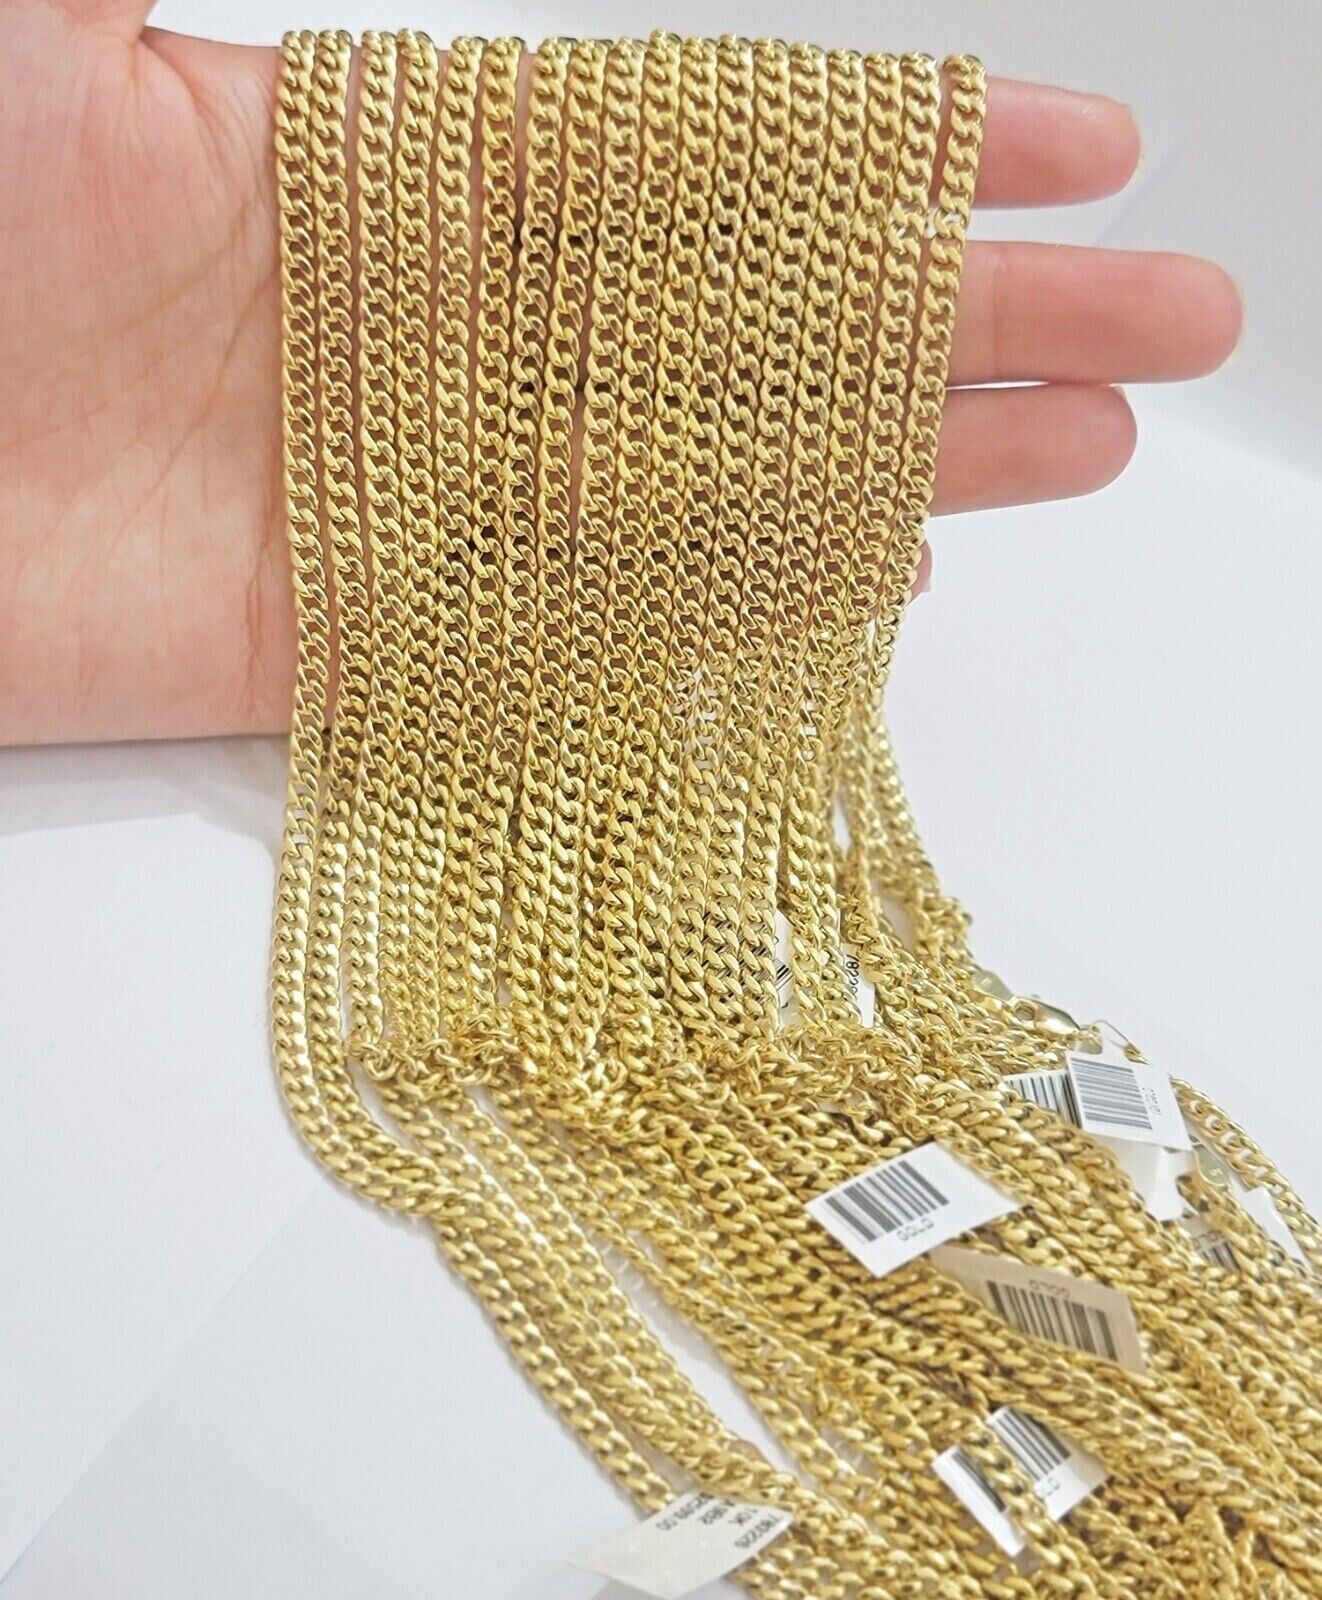 Real 10k Yellow Gold chain Miami Cuban Link 4mm 16-26